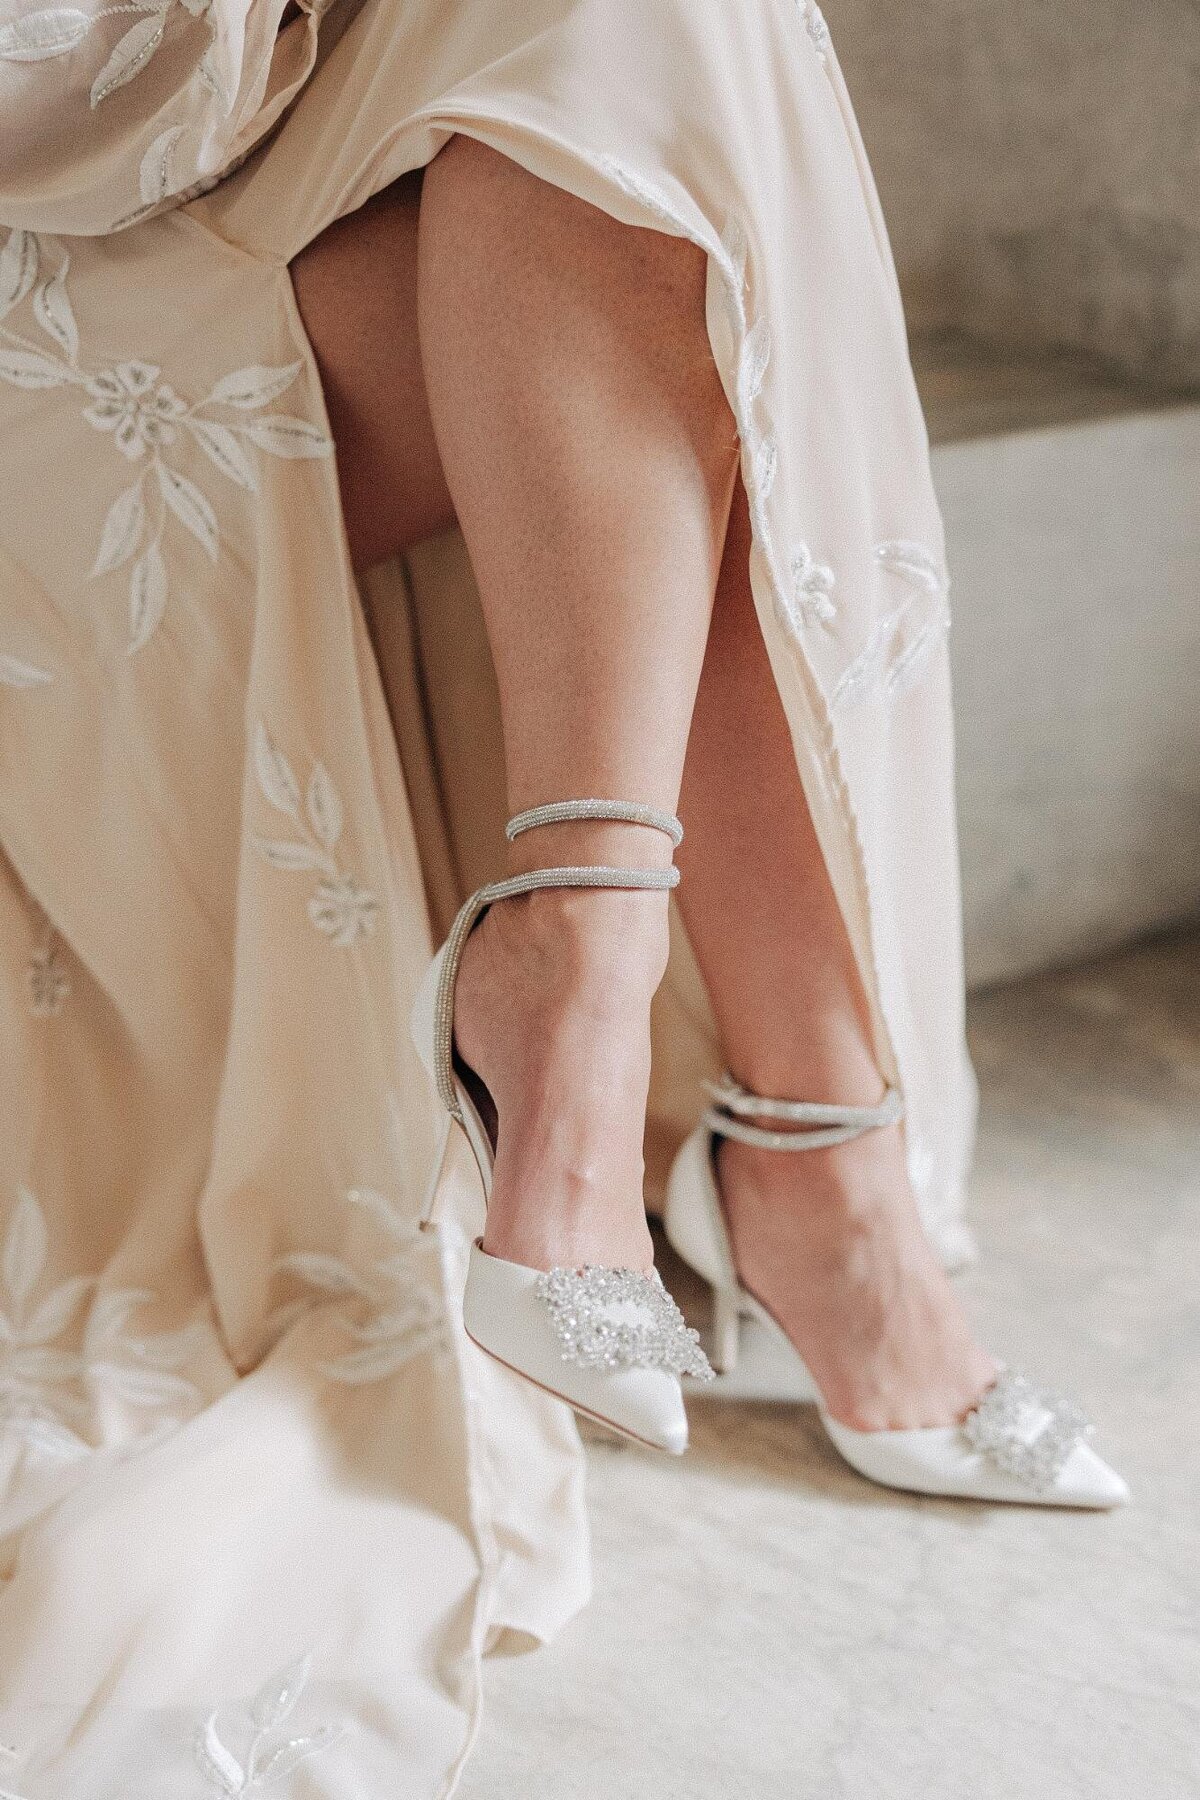 Elegant footwear and dress detail: a close-up of a person's adorned white shoes and lower hem of a flowery dress.